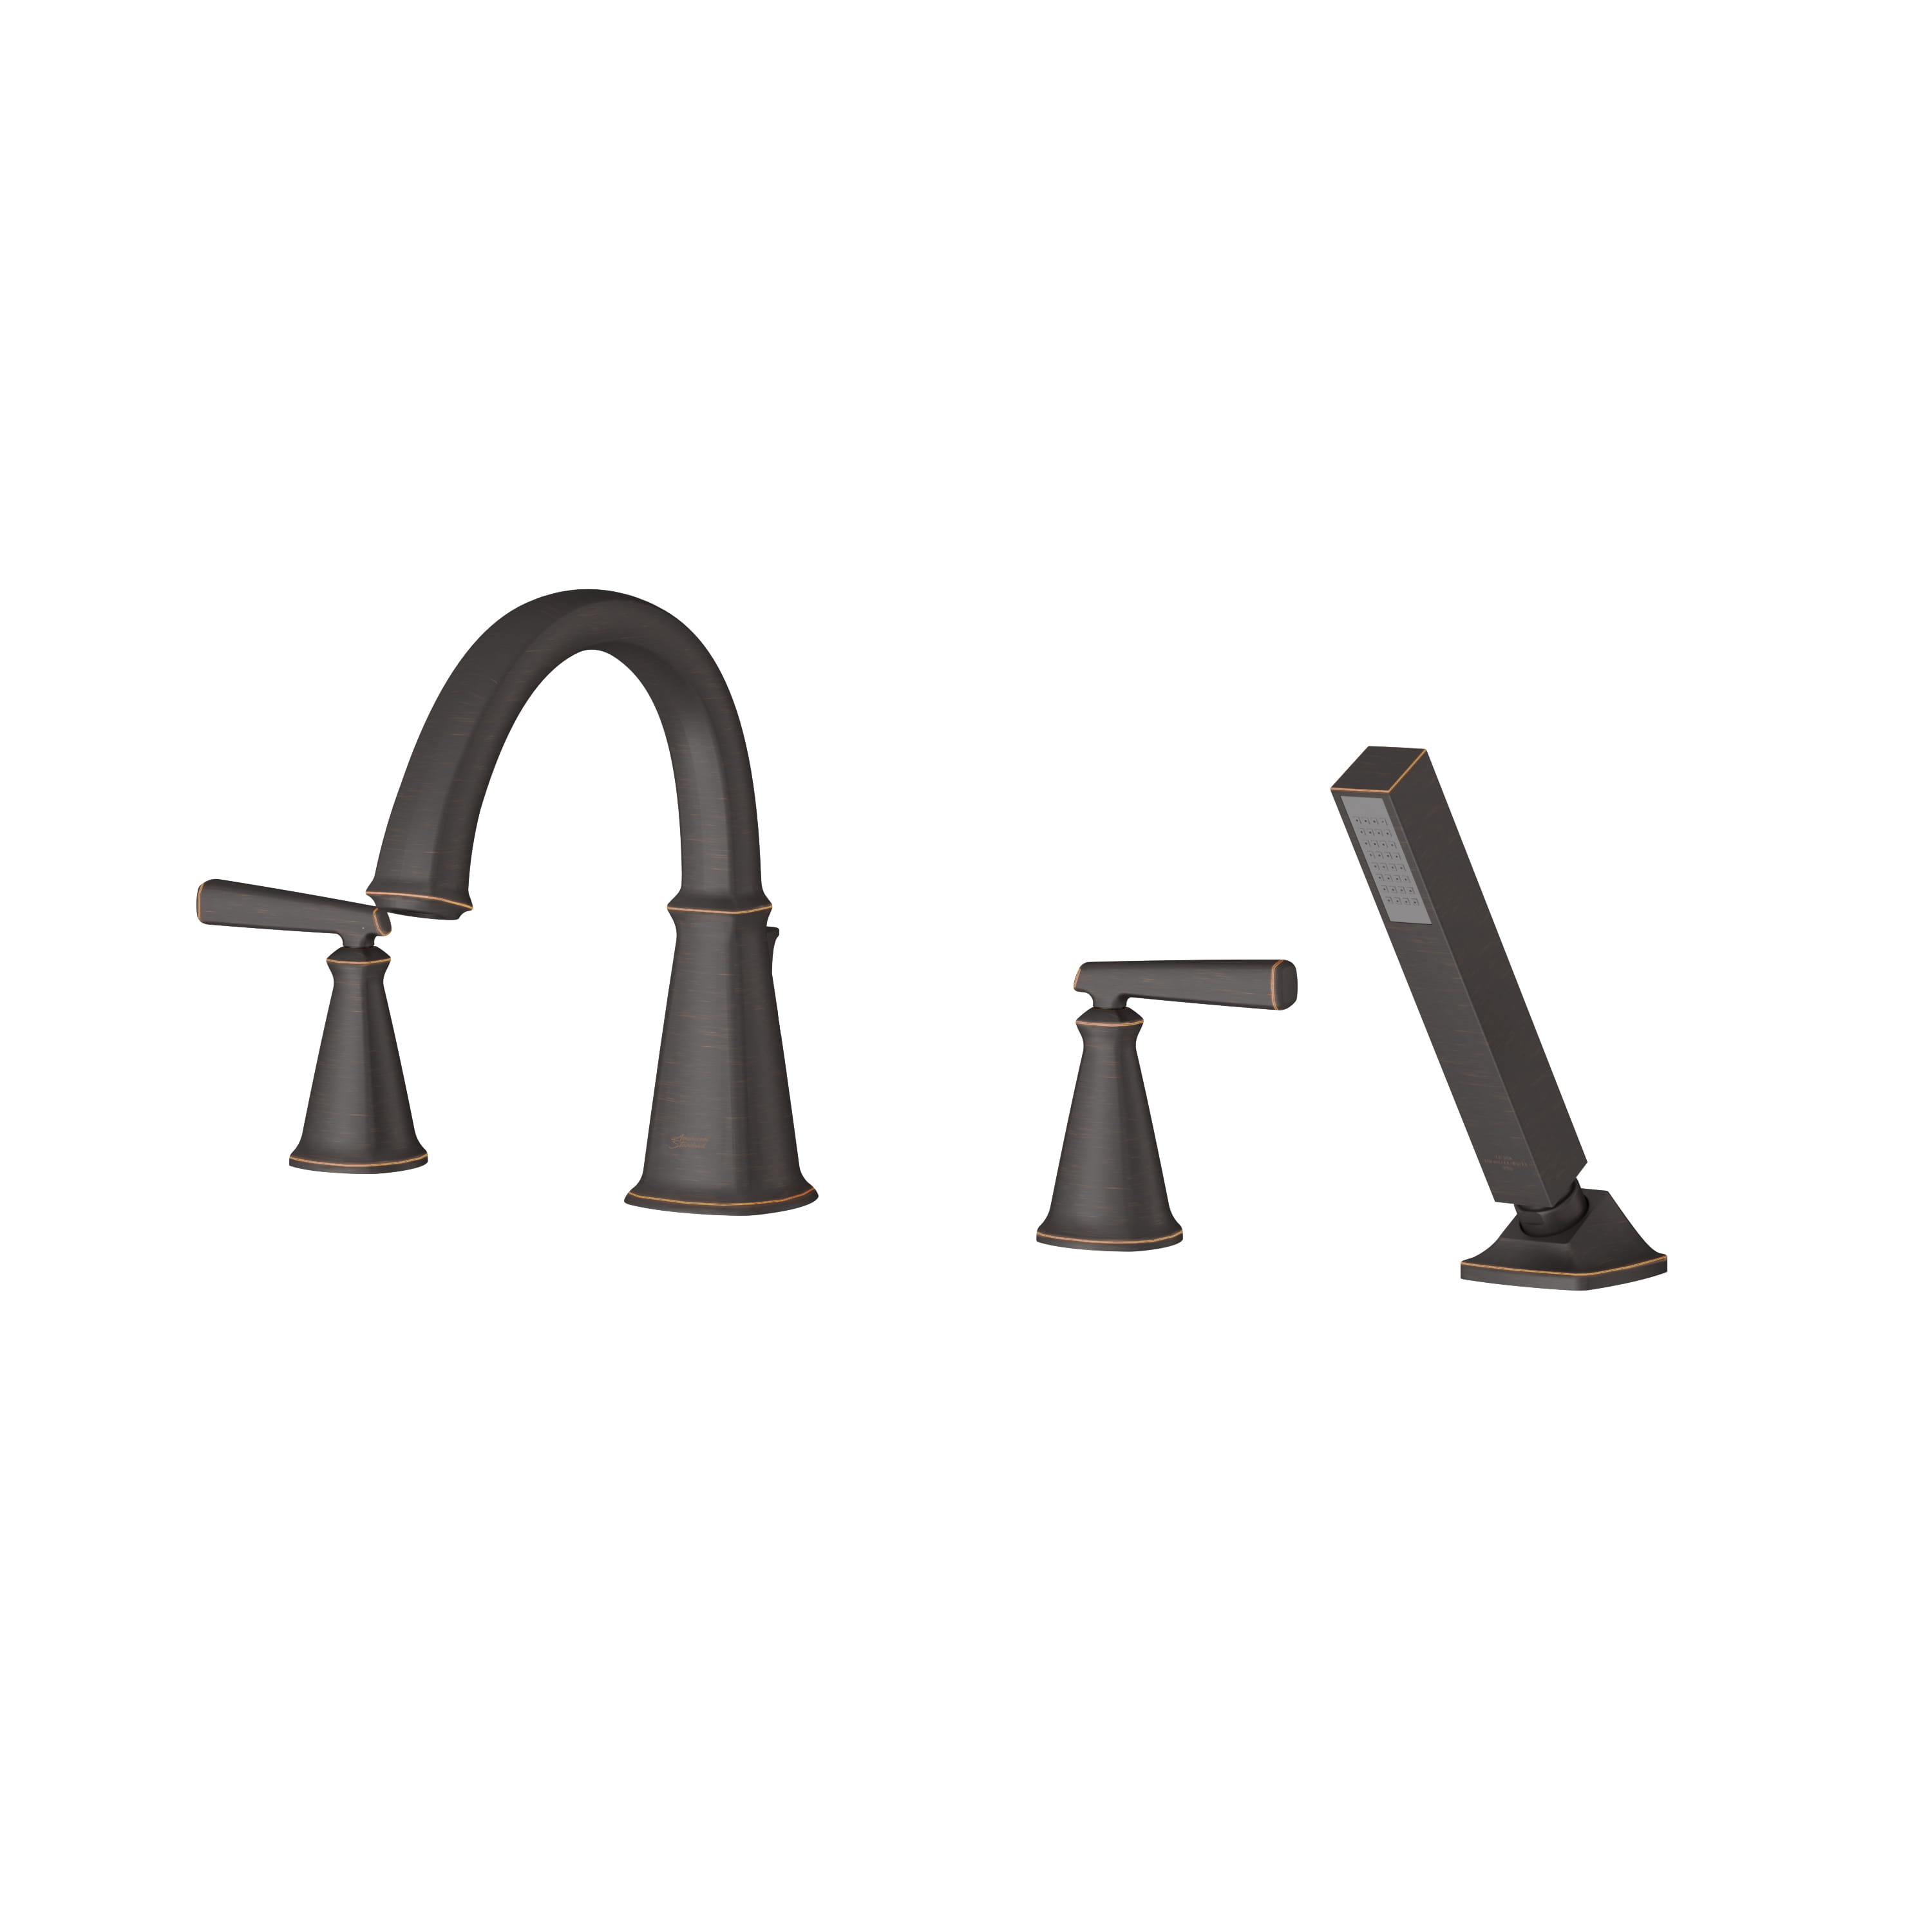 Edgemere® Bathtub Faucet With Lever Handles and Personal Shower for Flash® Rough-In Valve